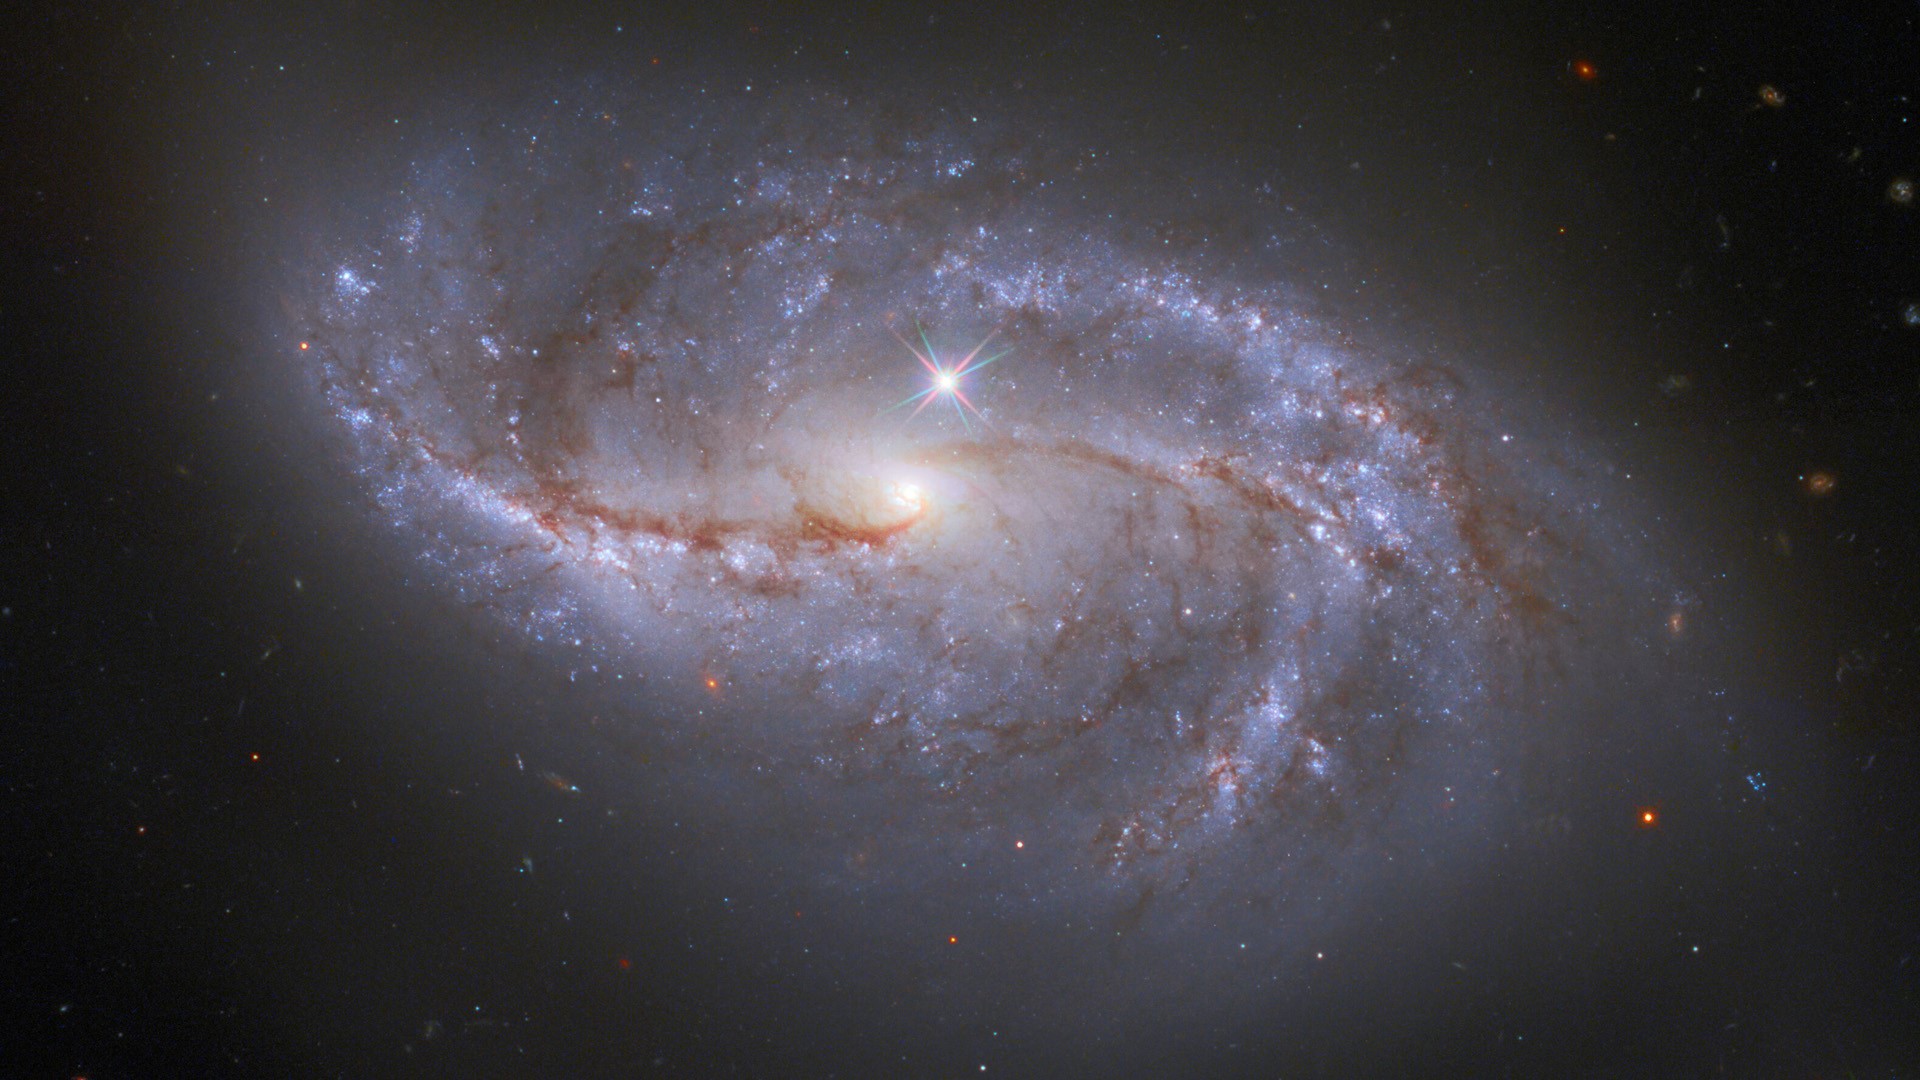 Barred Spiral Galaxy Ngc 2608 In The Constellation Cancer Windows 10 Spotlight Images